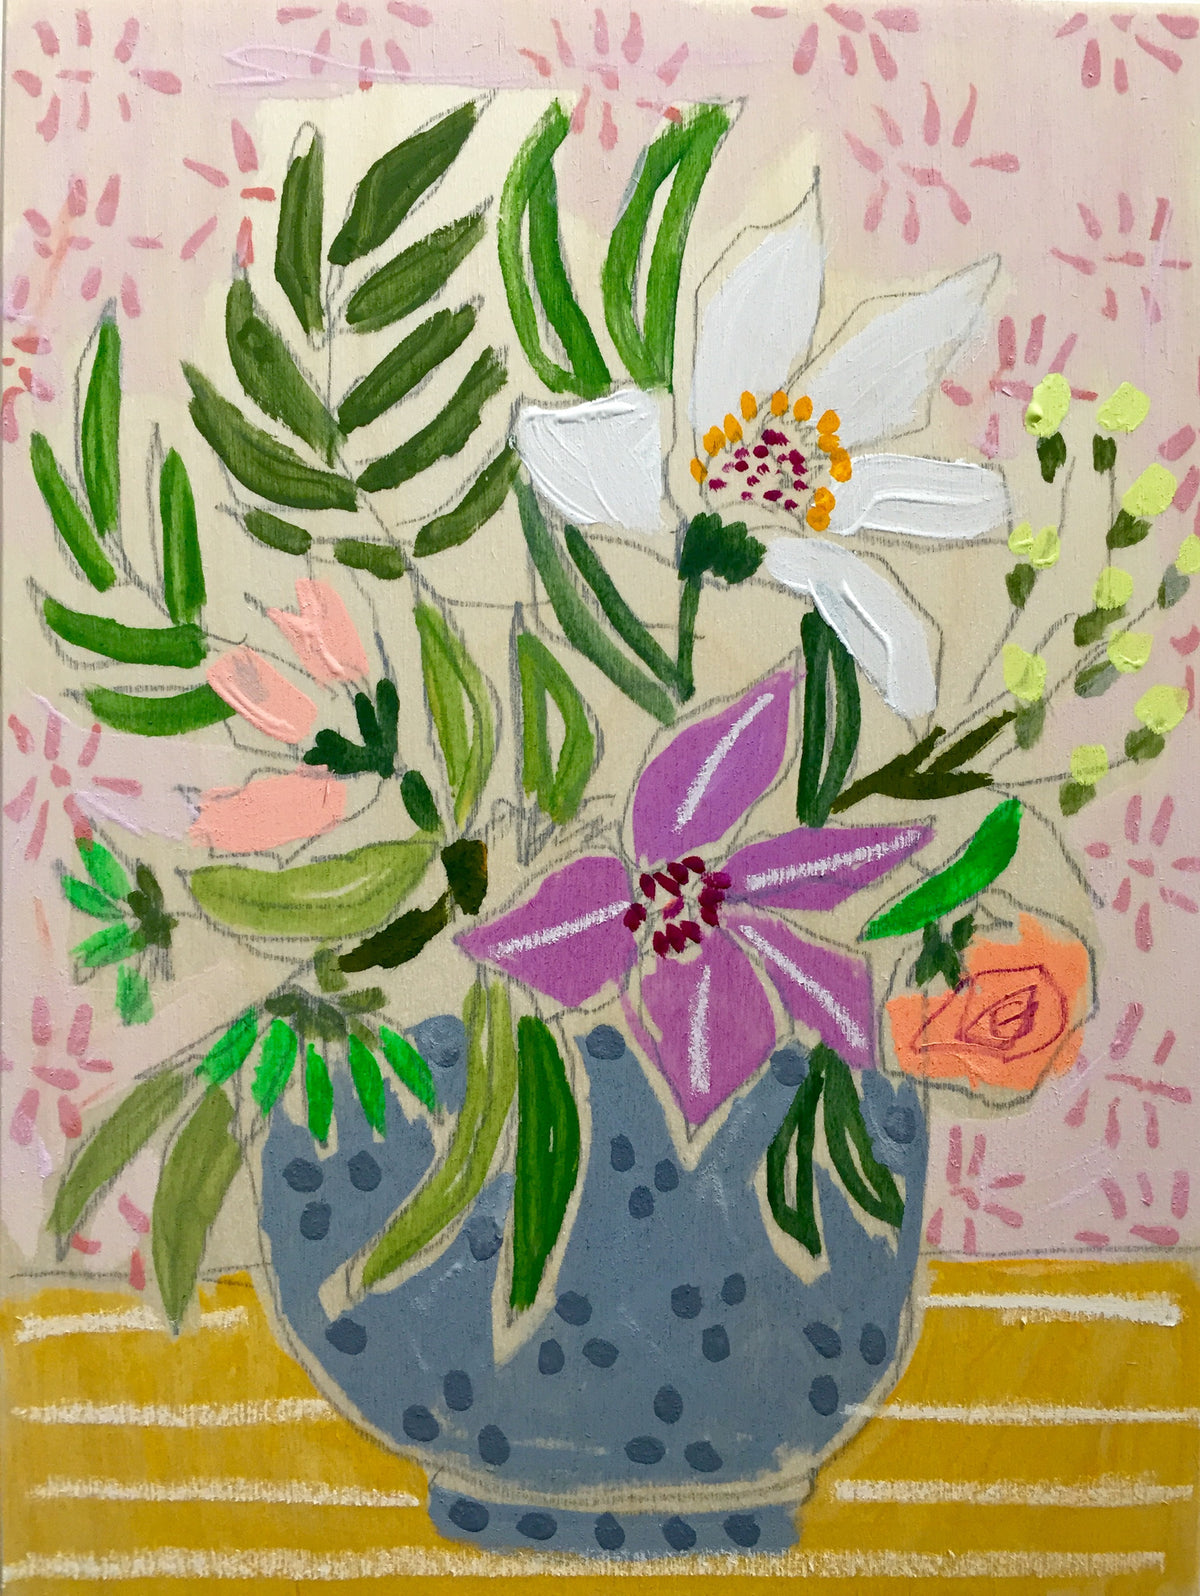 FLOWERS FOR FLORA - 9x12